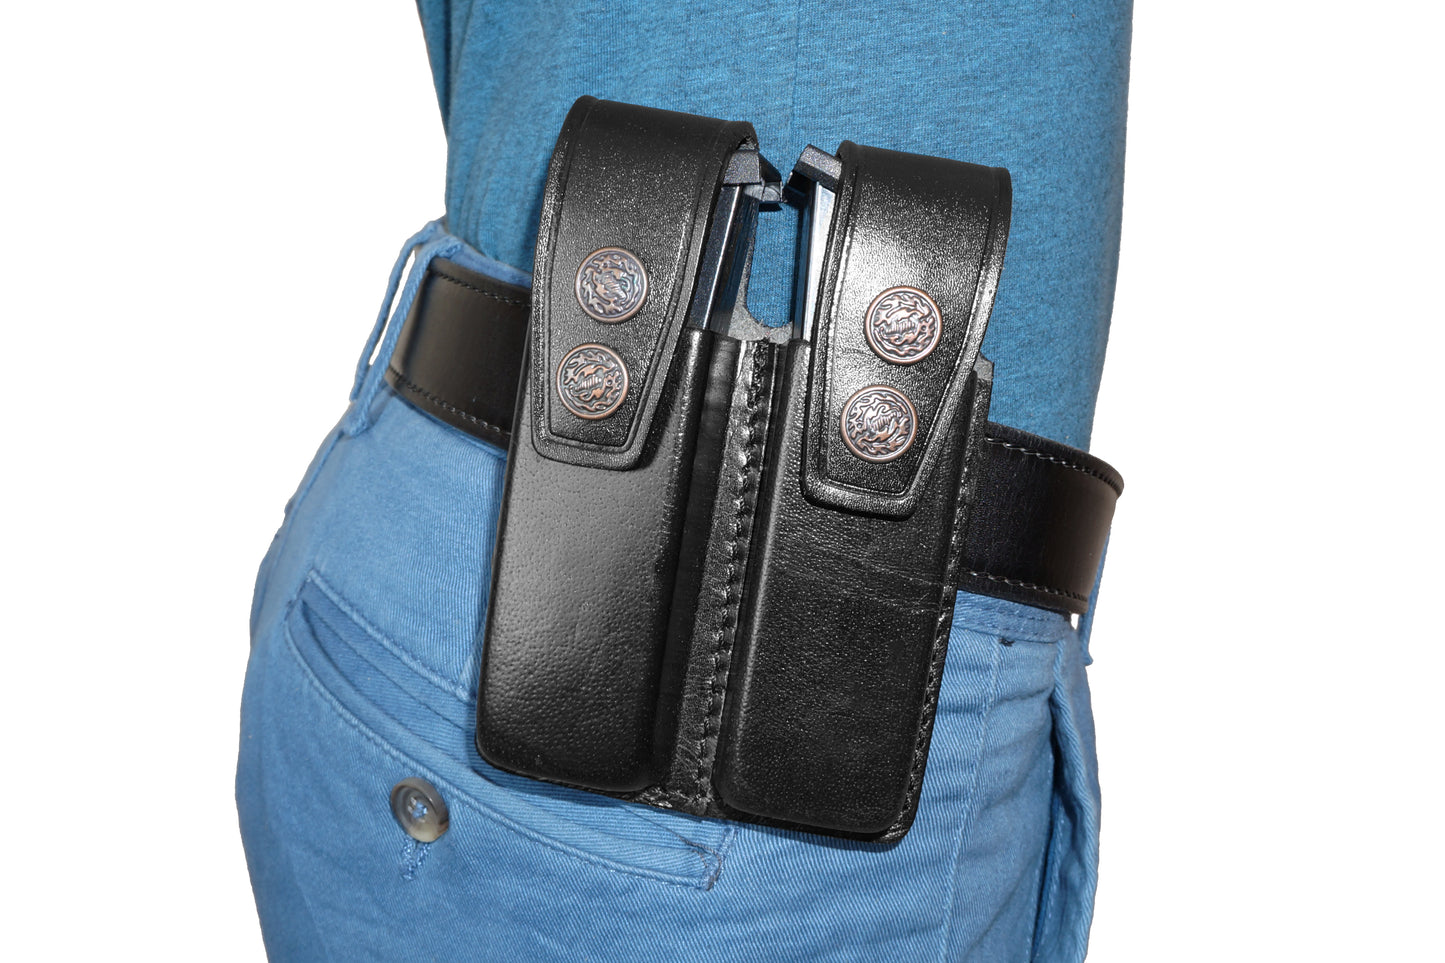 KHS311 Horizontal Shoulder & Belt Holster RH Thumb Break with Double Magazine Pouch for CZ 75 (2in1) Free Extension for Big Body Size!